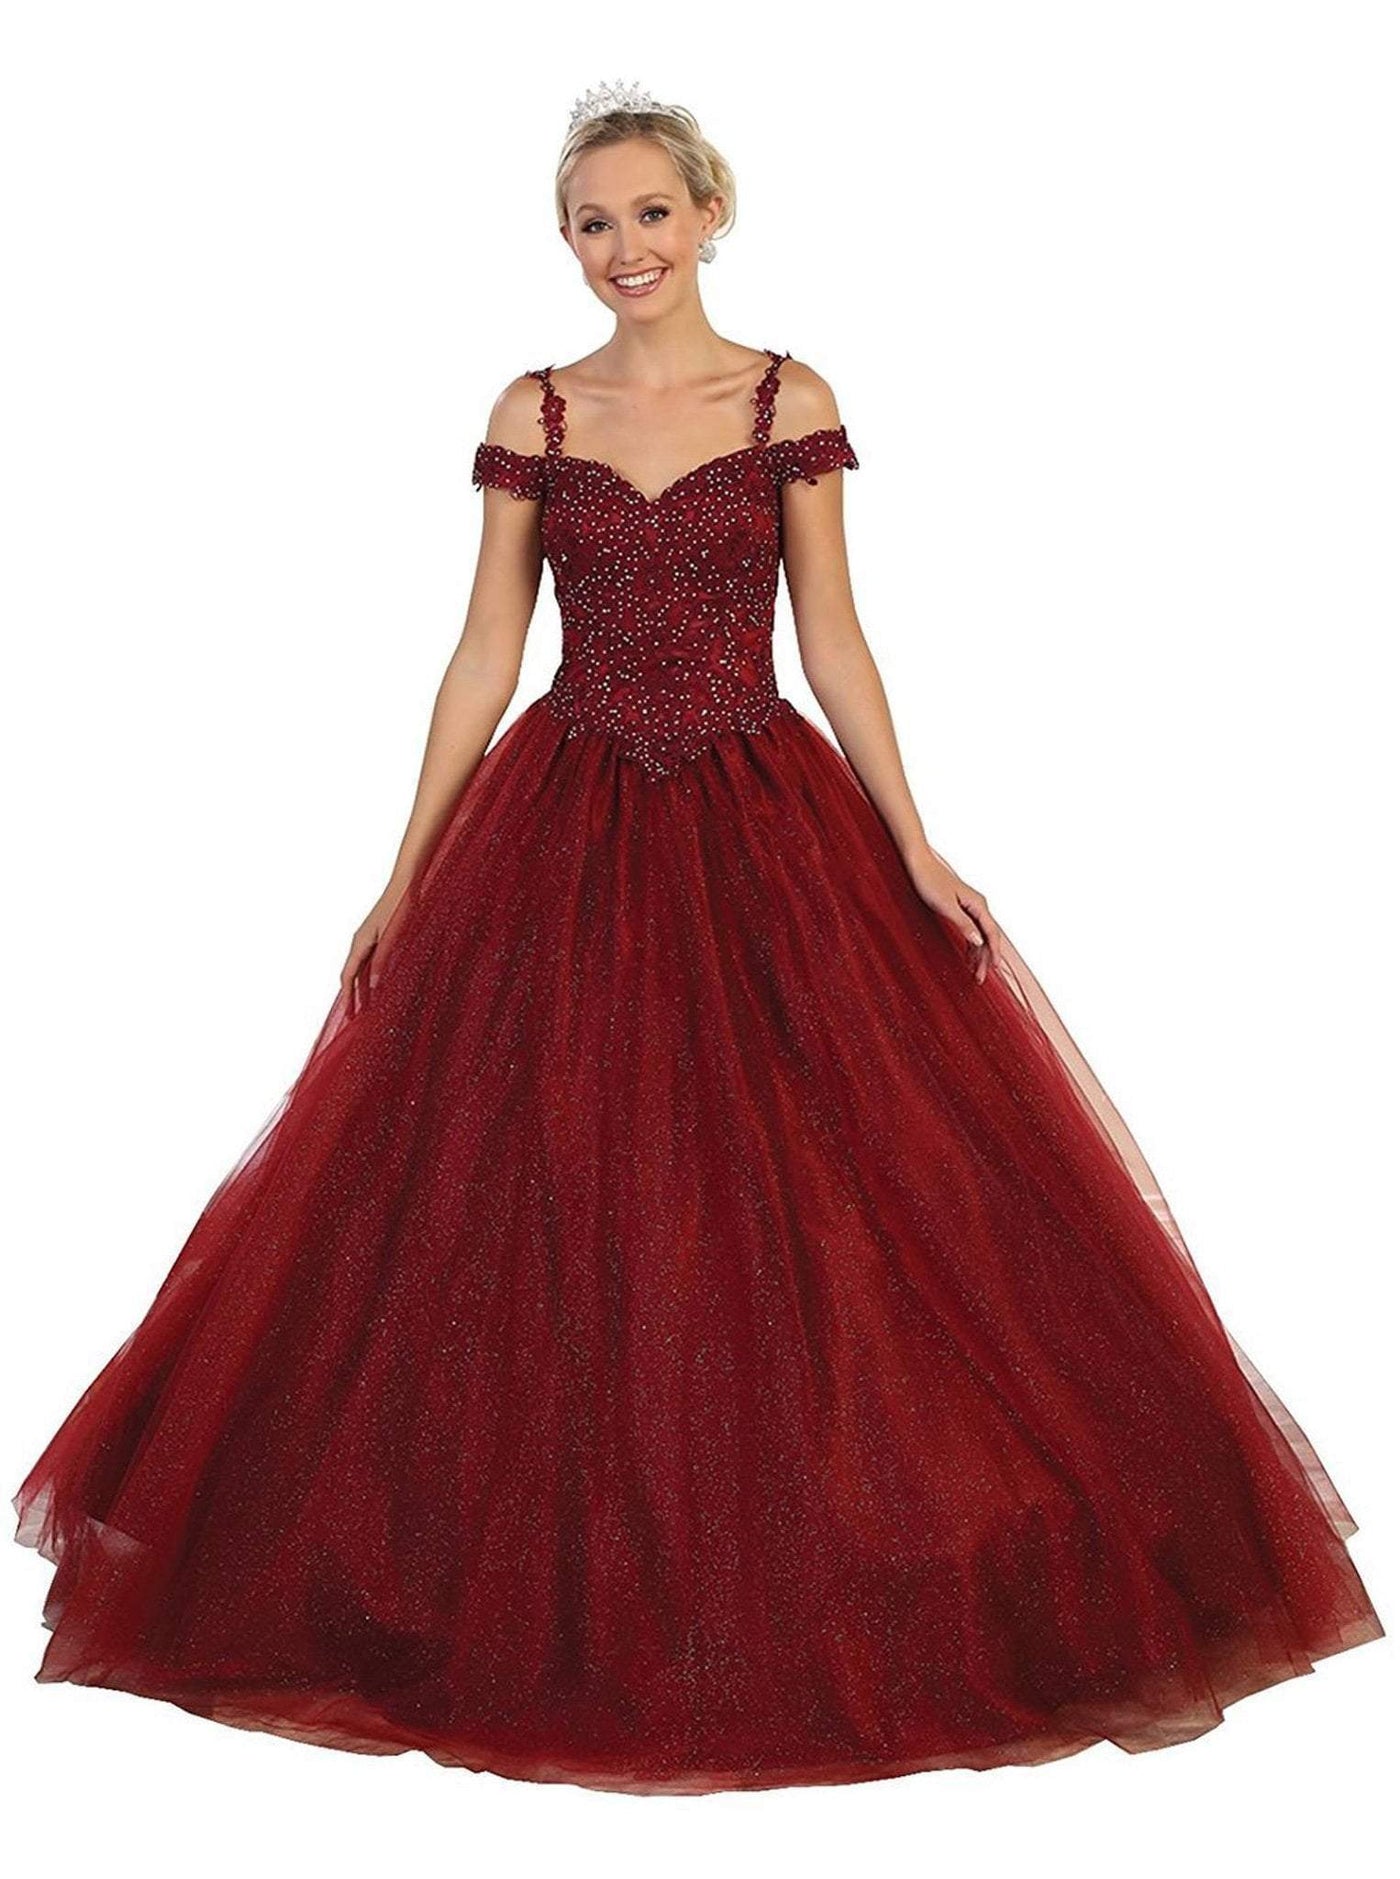 May Queen - Beaded Lace Sweetheart Quinceanera Ballgown Quinceanera Dresses 4 / Burgundy